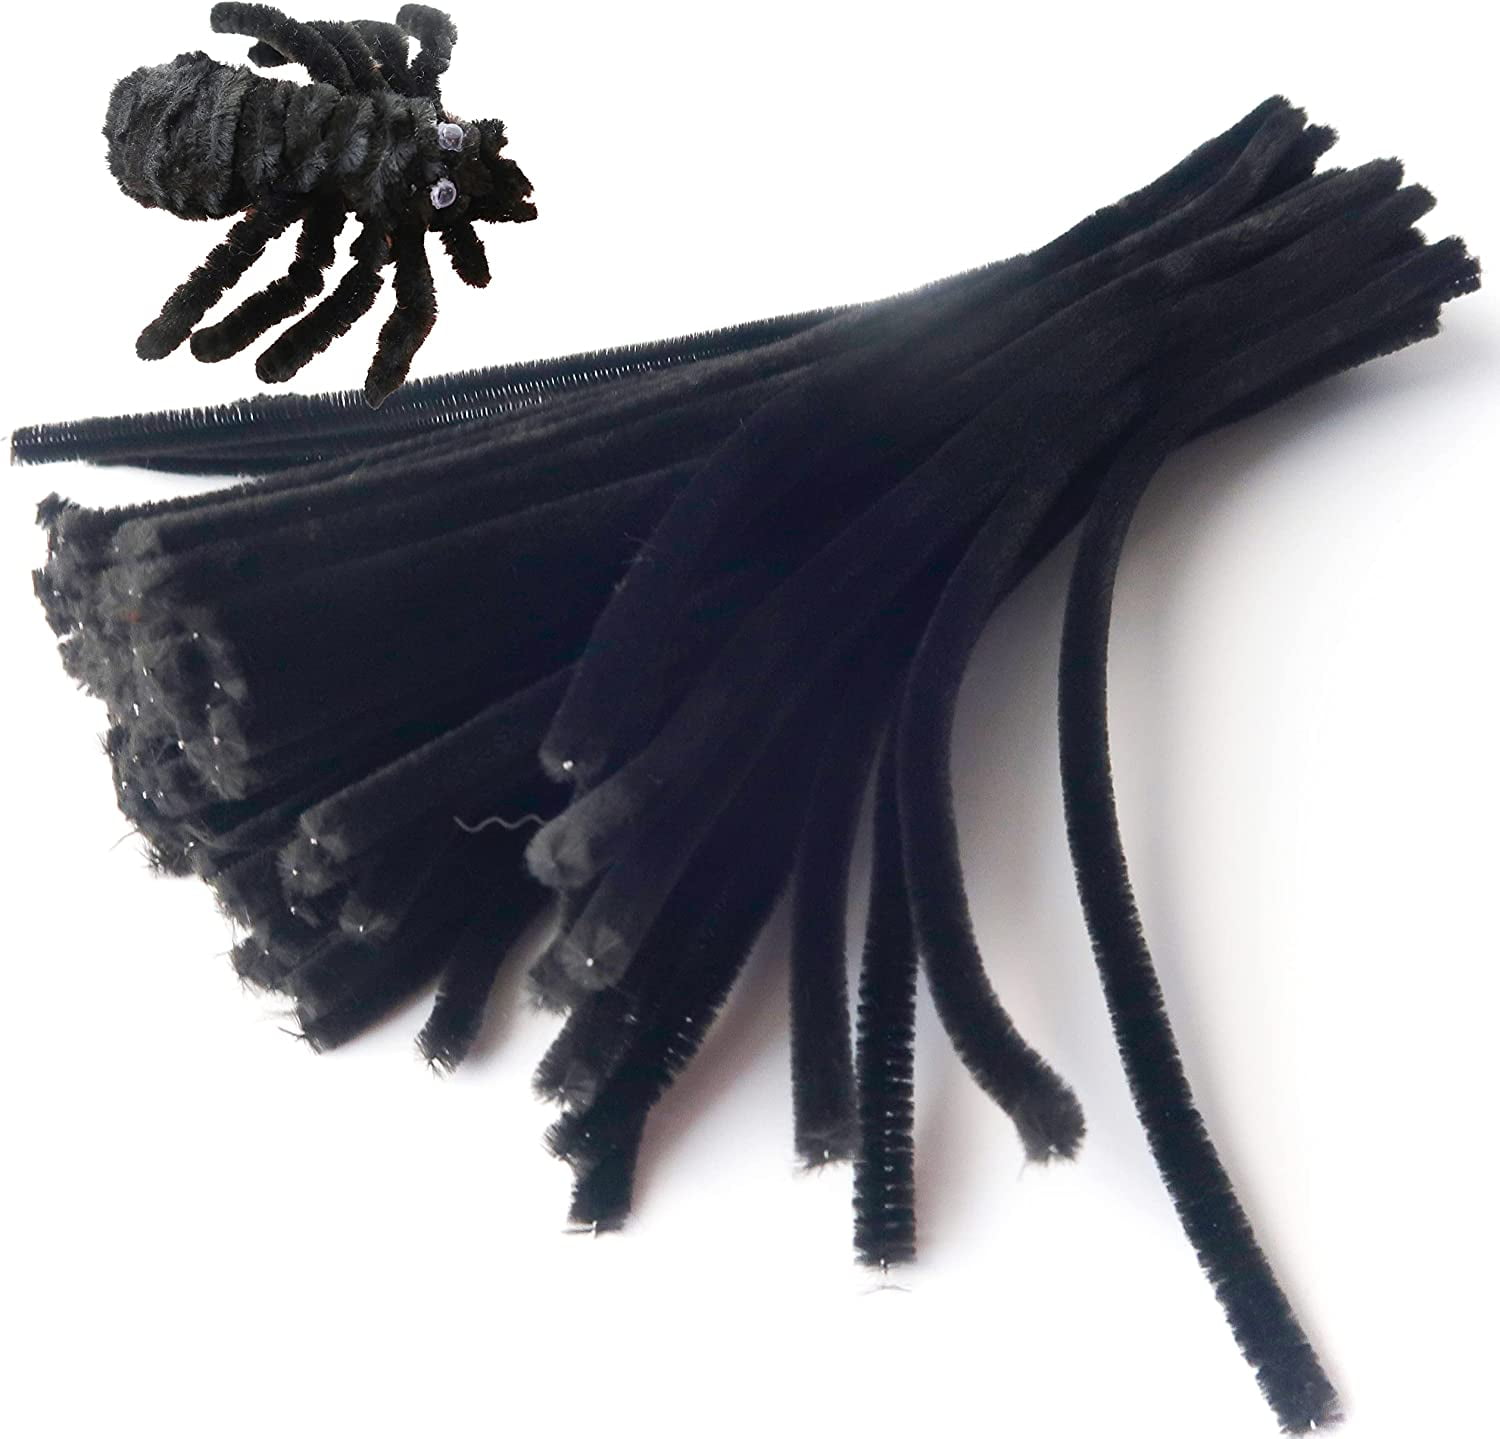 100 Pieces 7mm x 12 Inch Pipe Cleaners, Thick Fuzzy Black Chenille Stems  for Craft Supplies Kids DIY Art Decorations